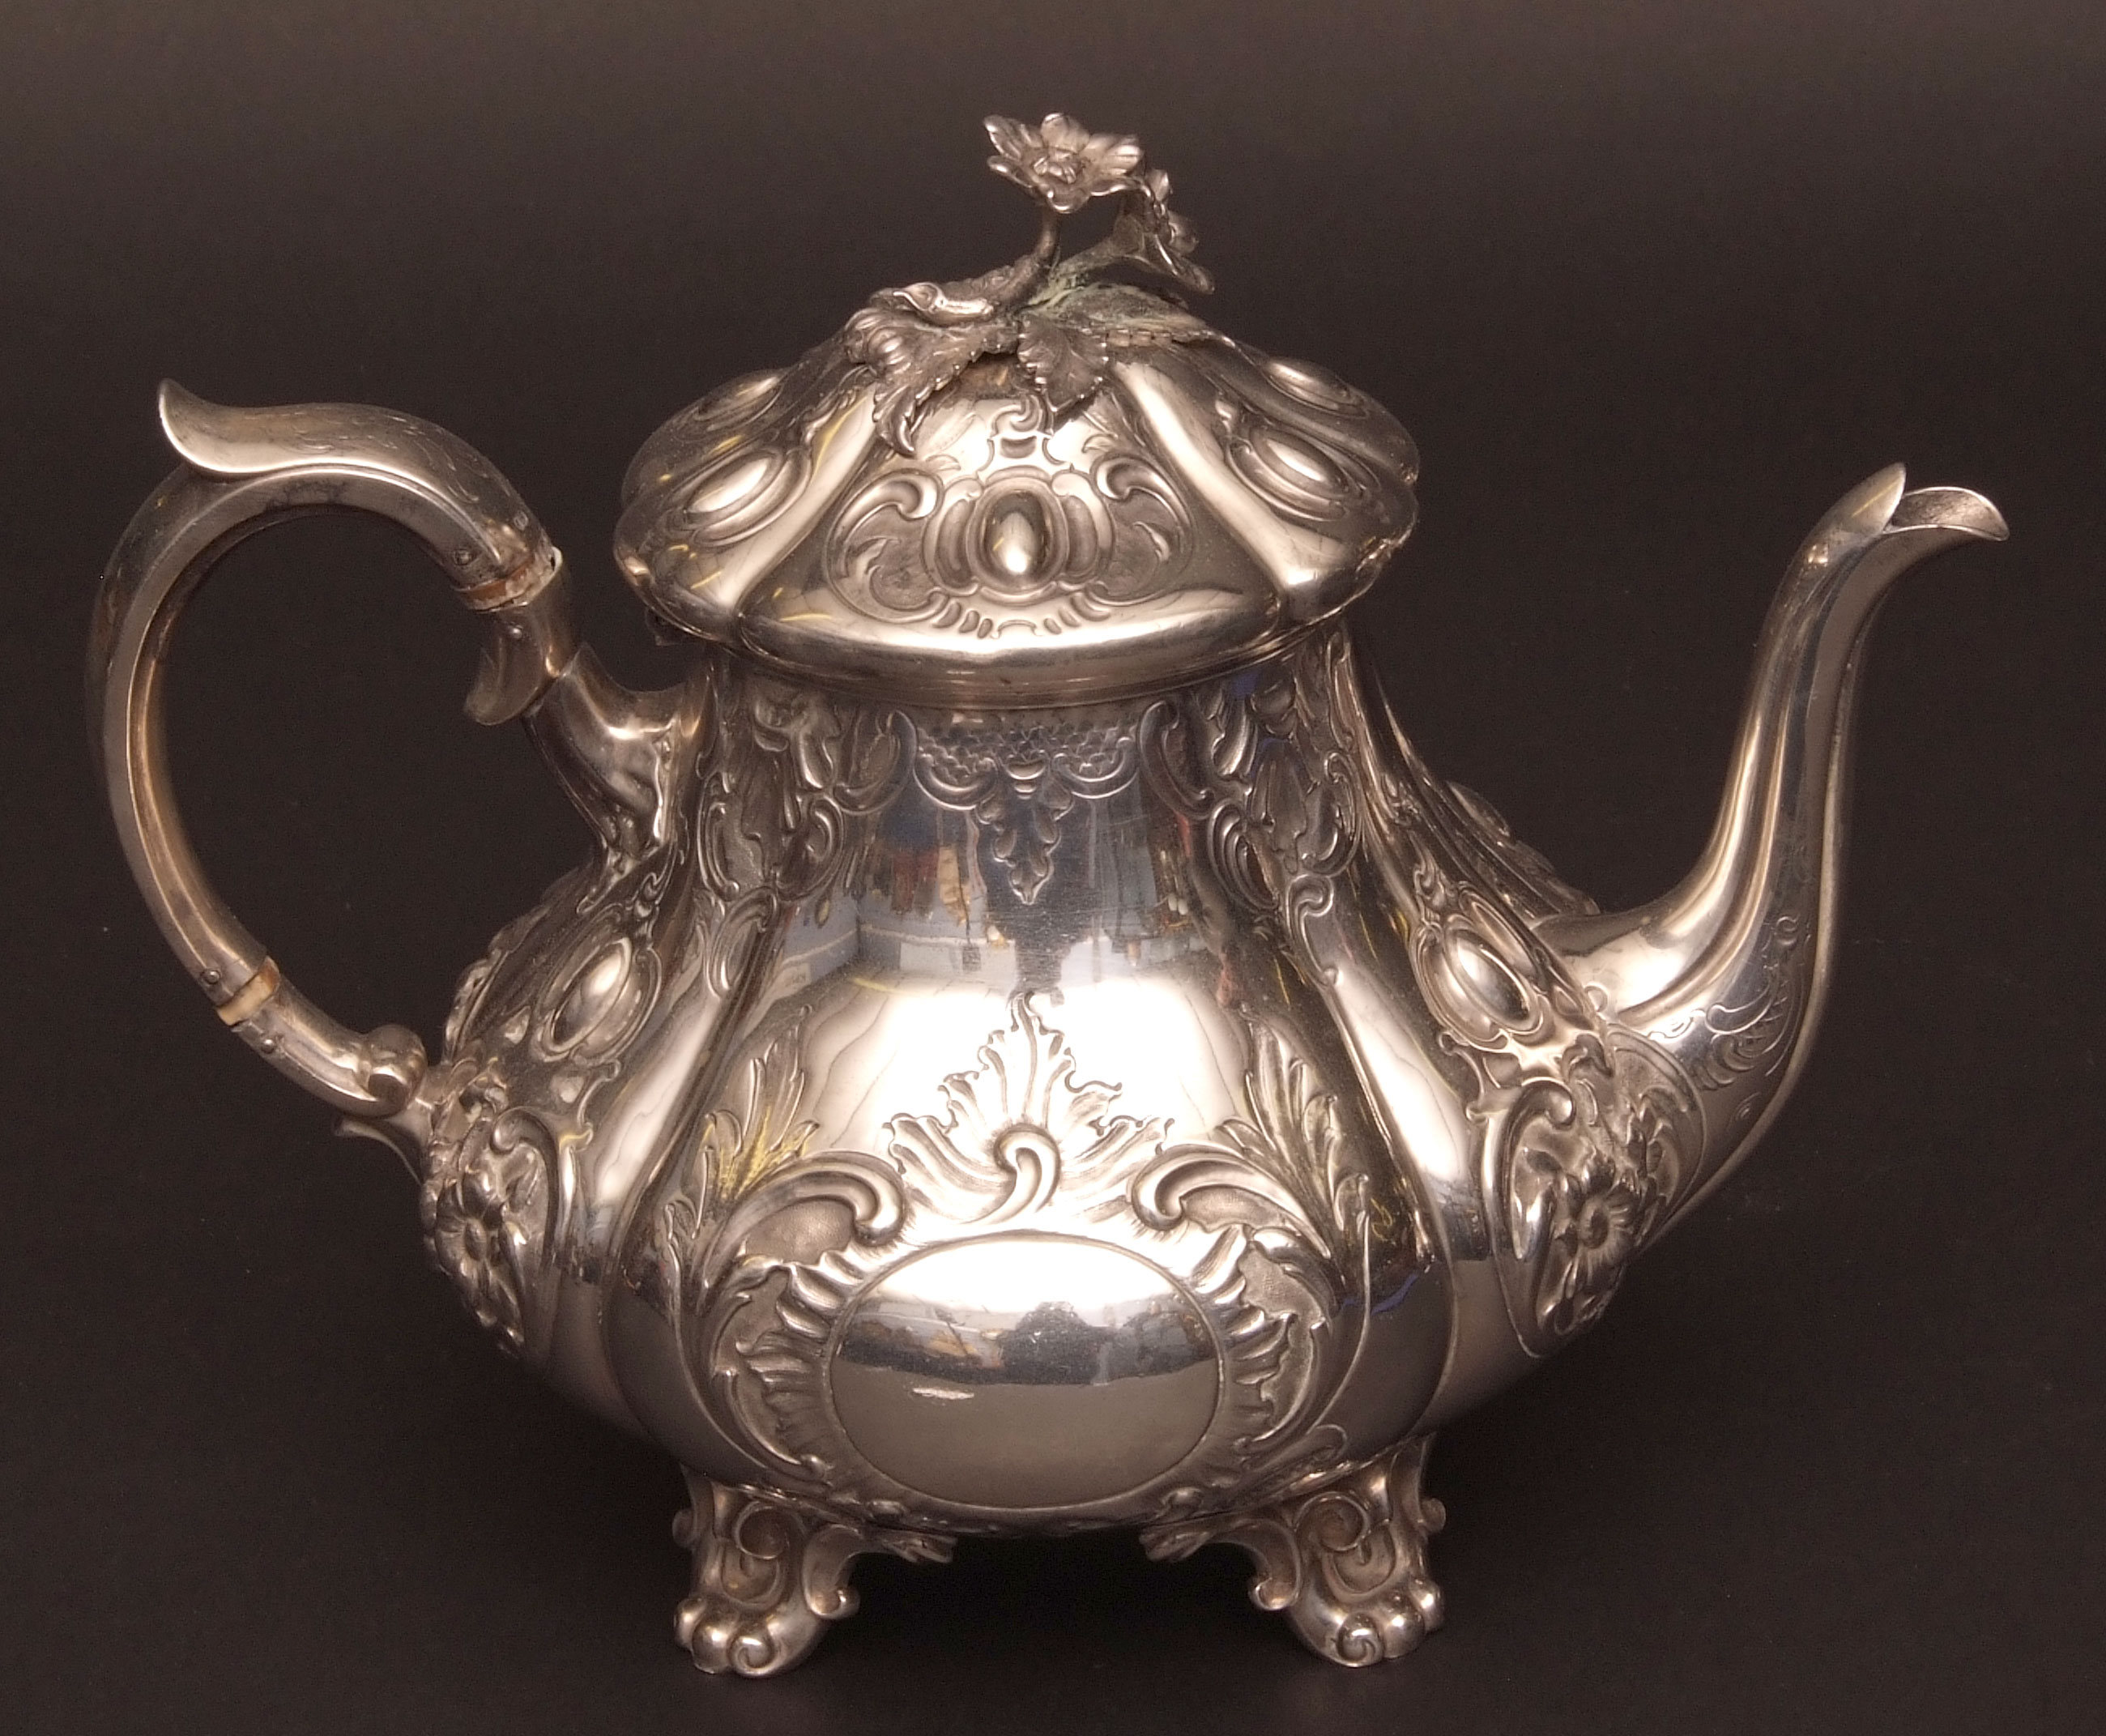 Victorian teapot of lobed baluster form with hinged and domed cover with cast and applied floral